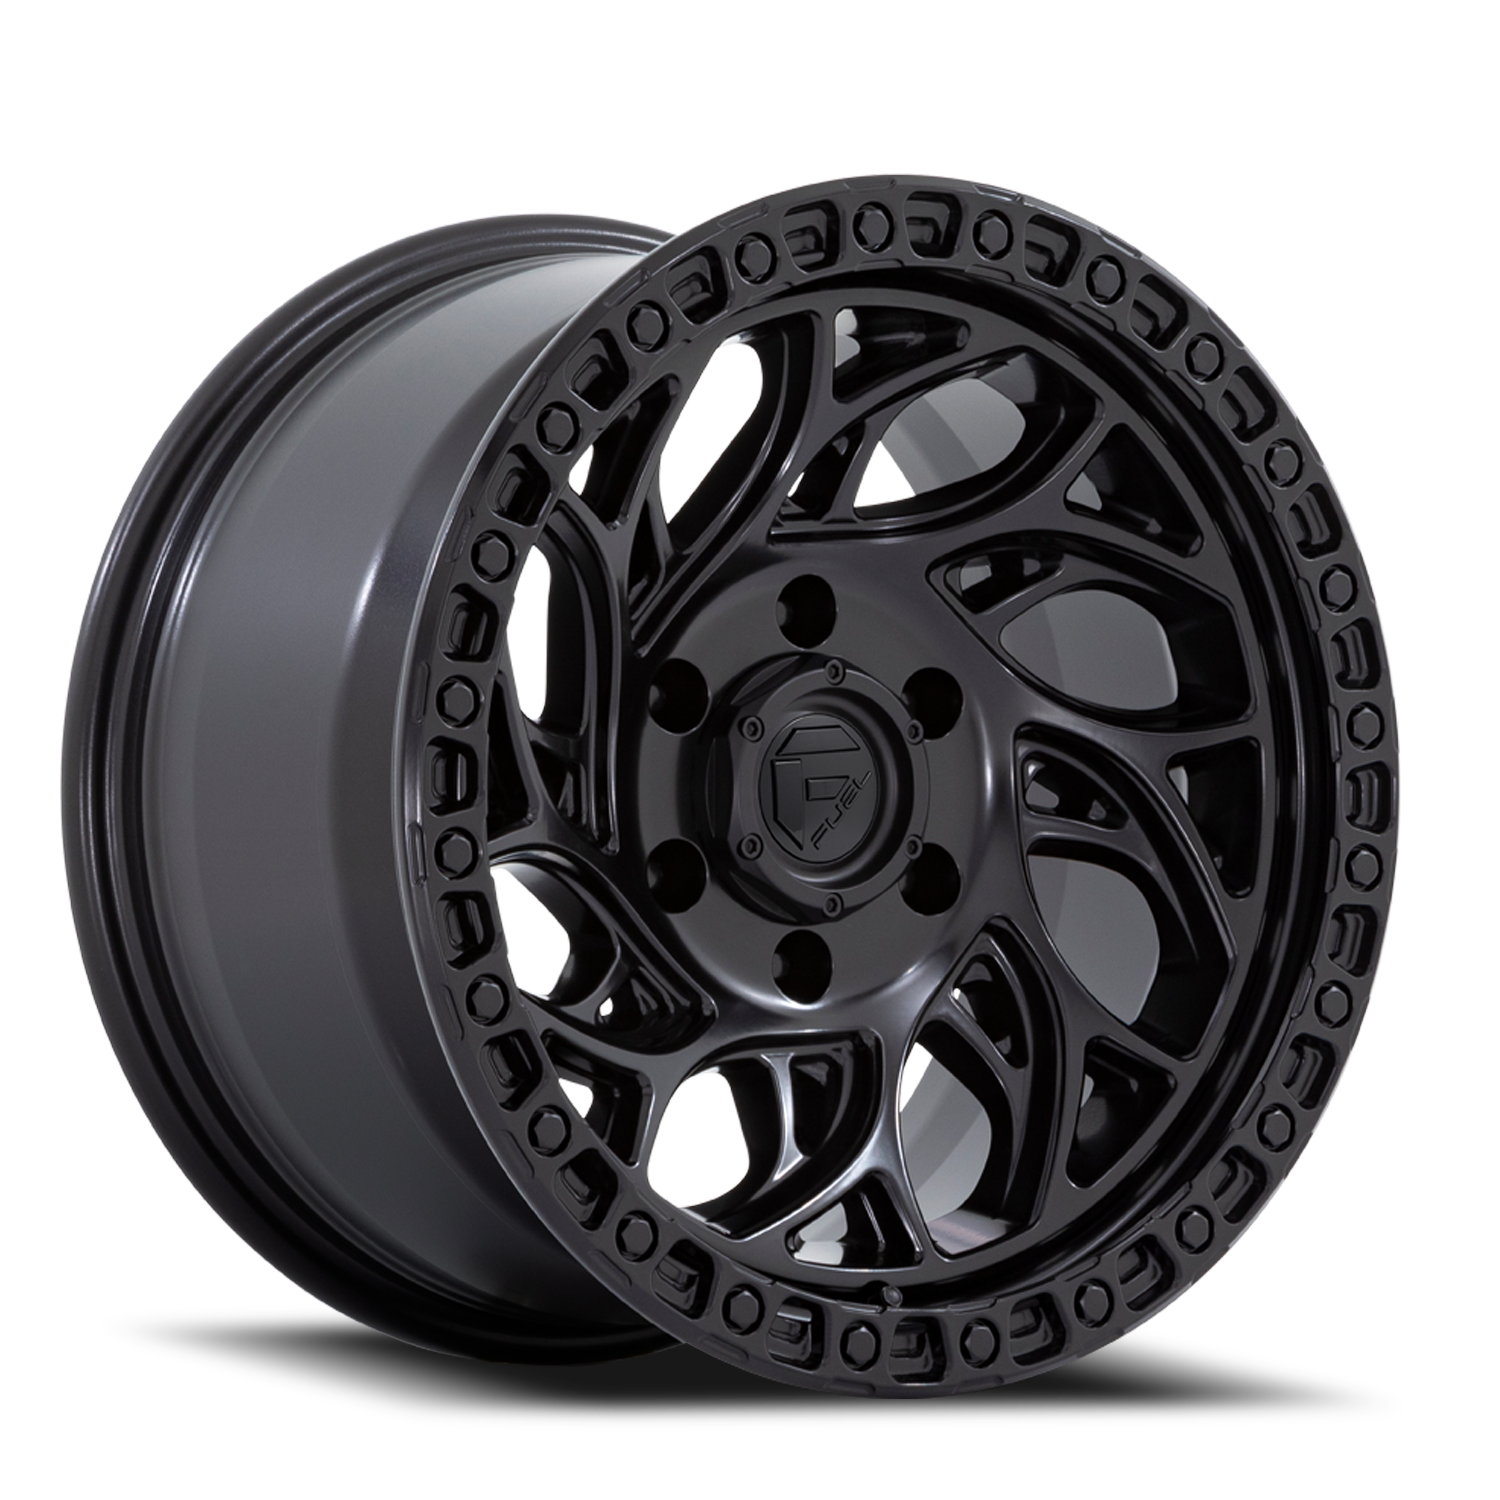 Aluminum Wheels 18X9 Runner OR D852 6 On 139.7 Blackout 106.1 Bore -12 Offset Fuel Off Road Wheels